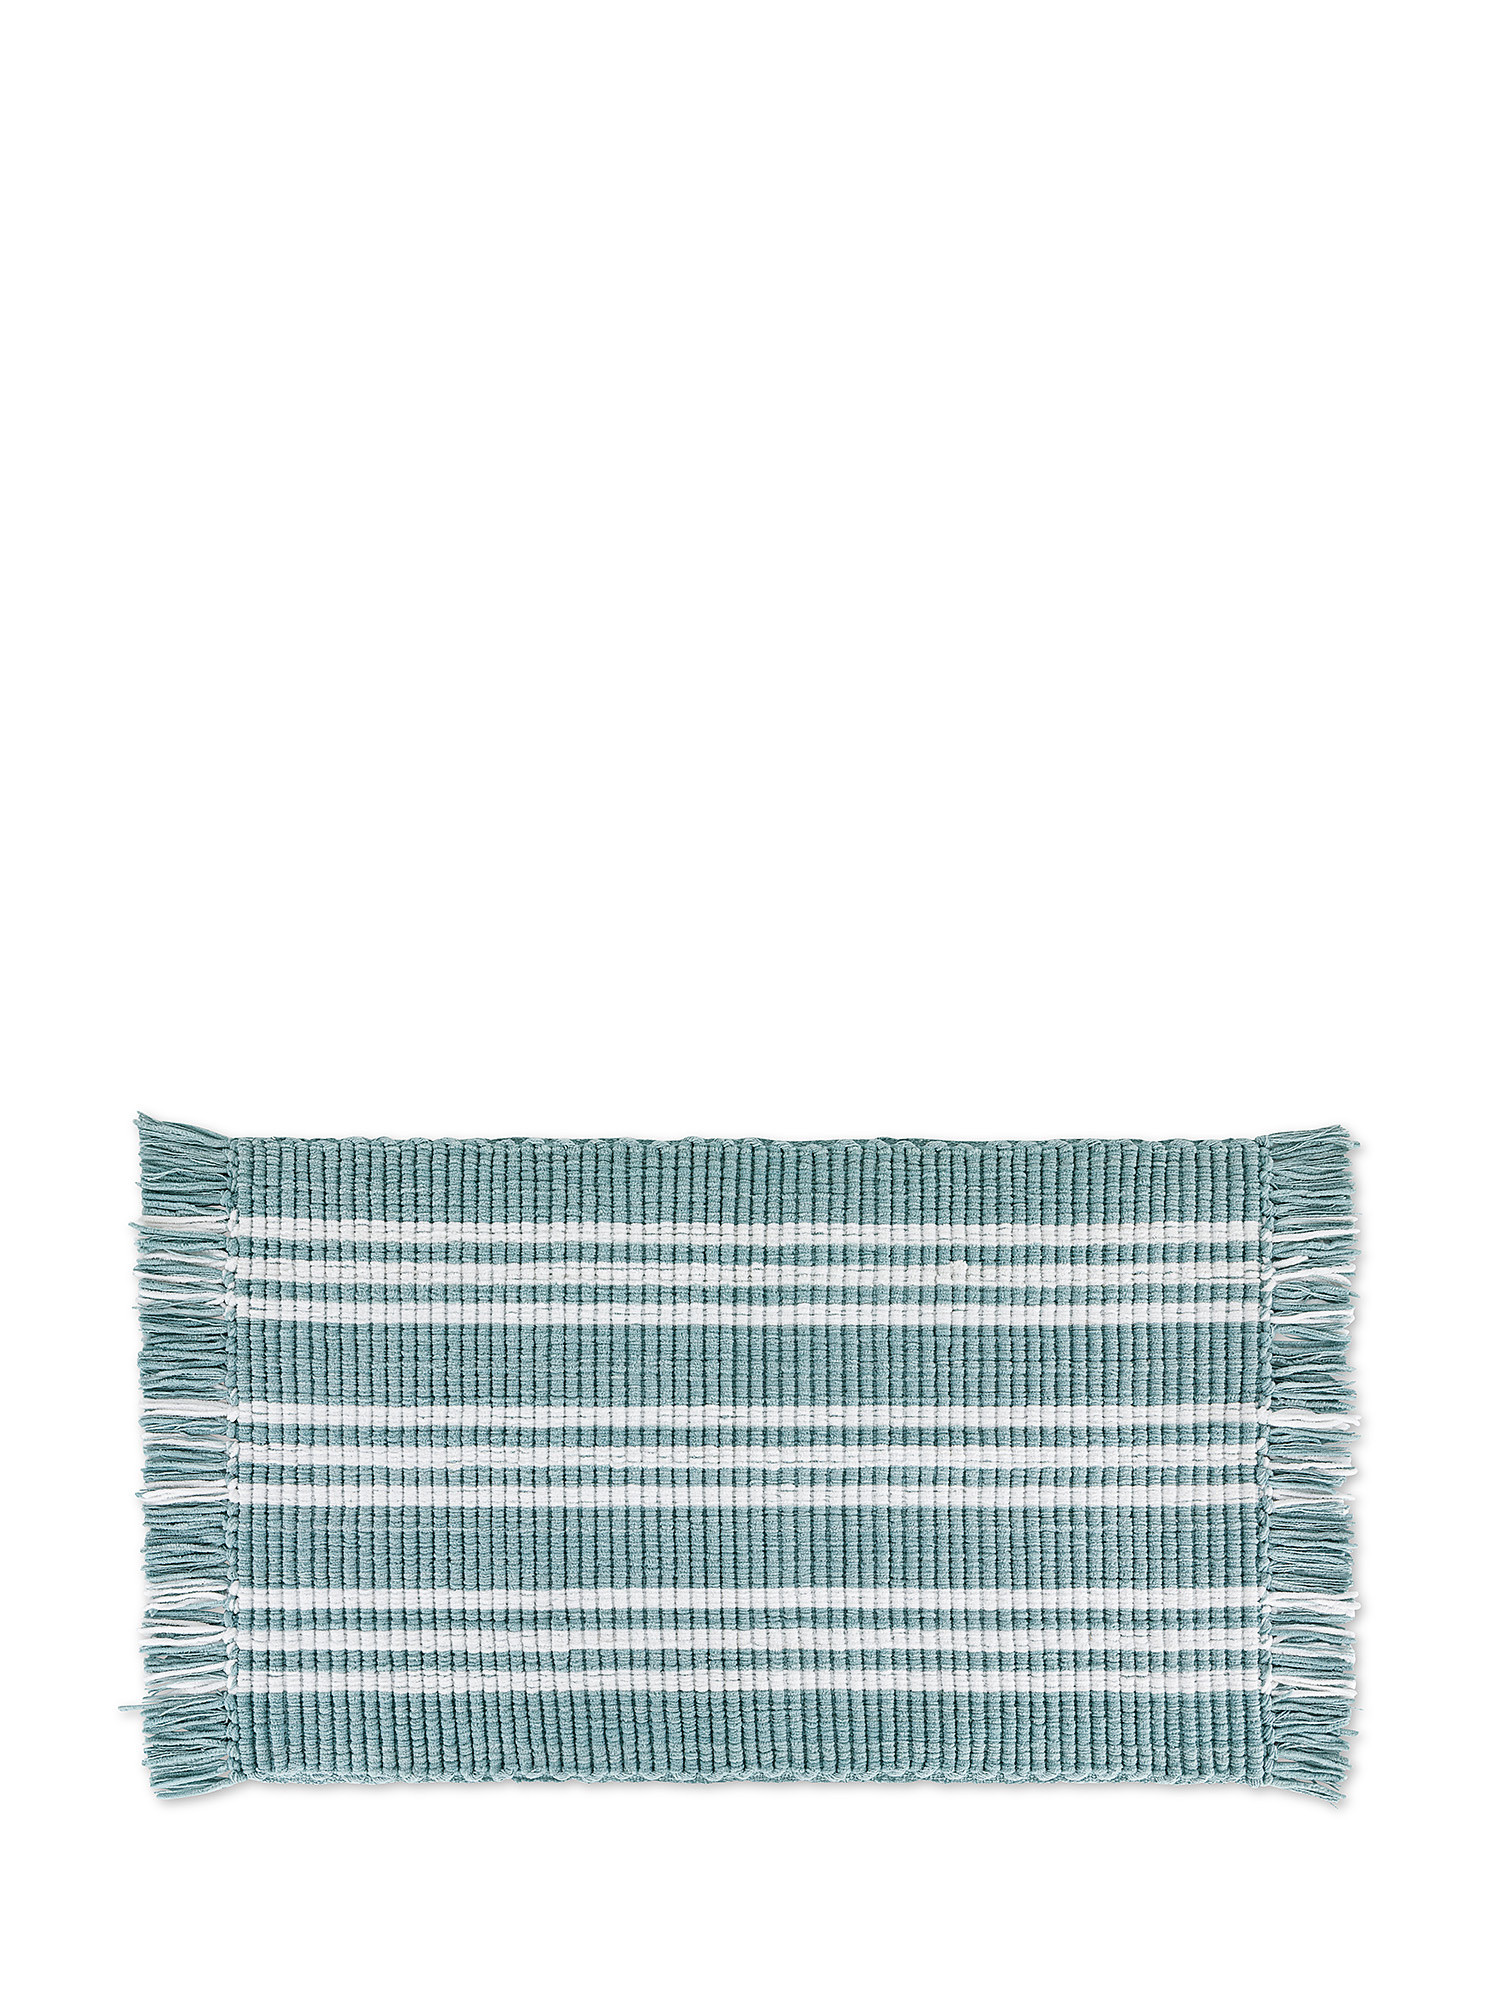 Micro cotton bath mat with fringes, Light Blue, large image number 0